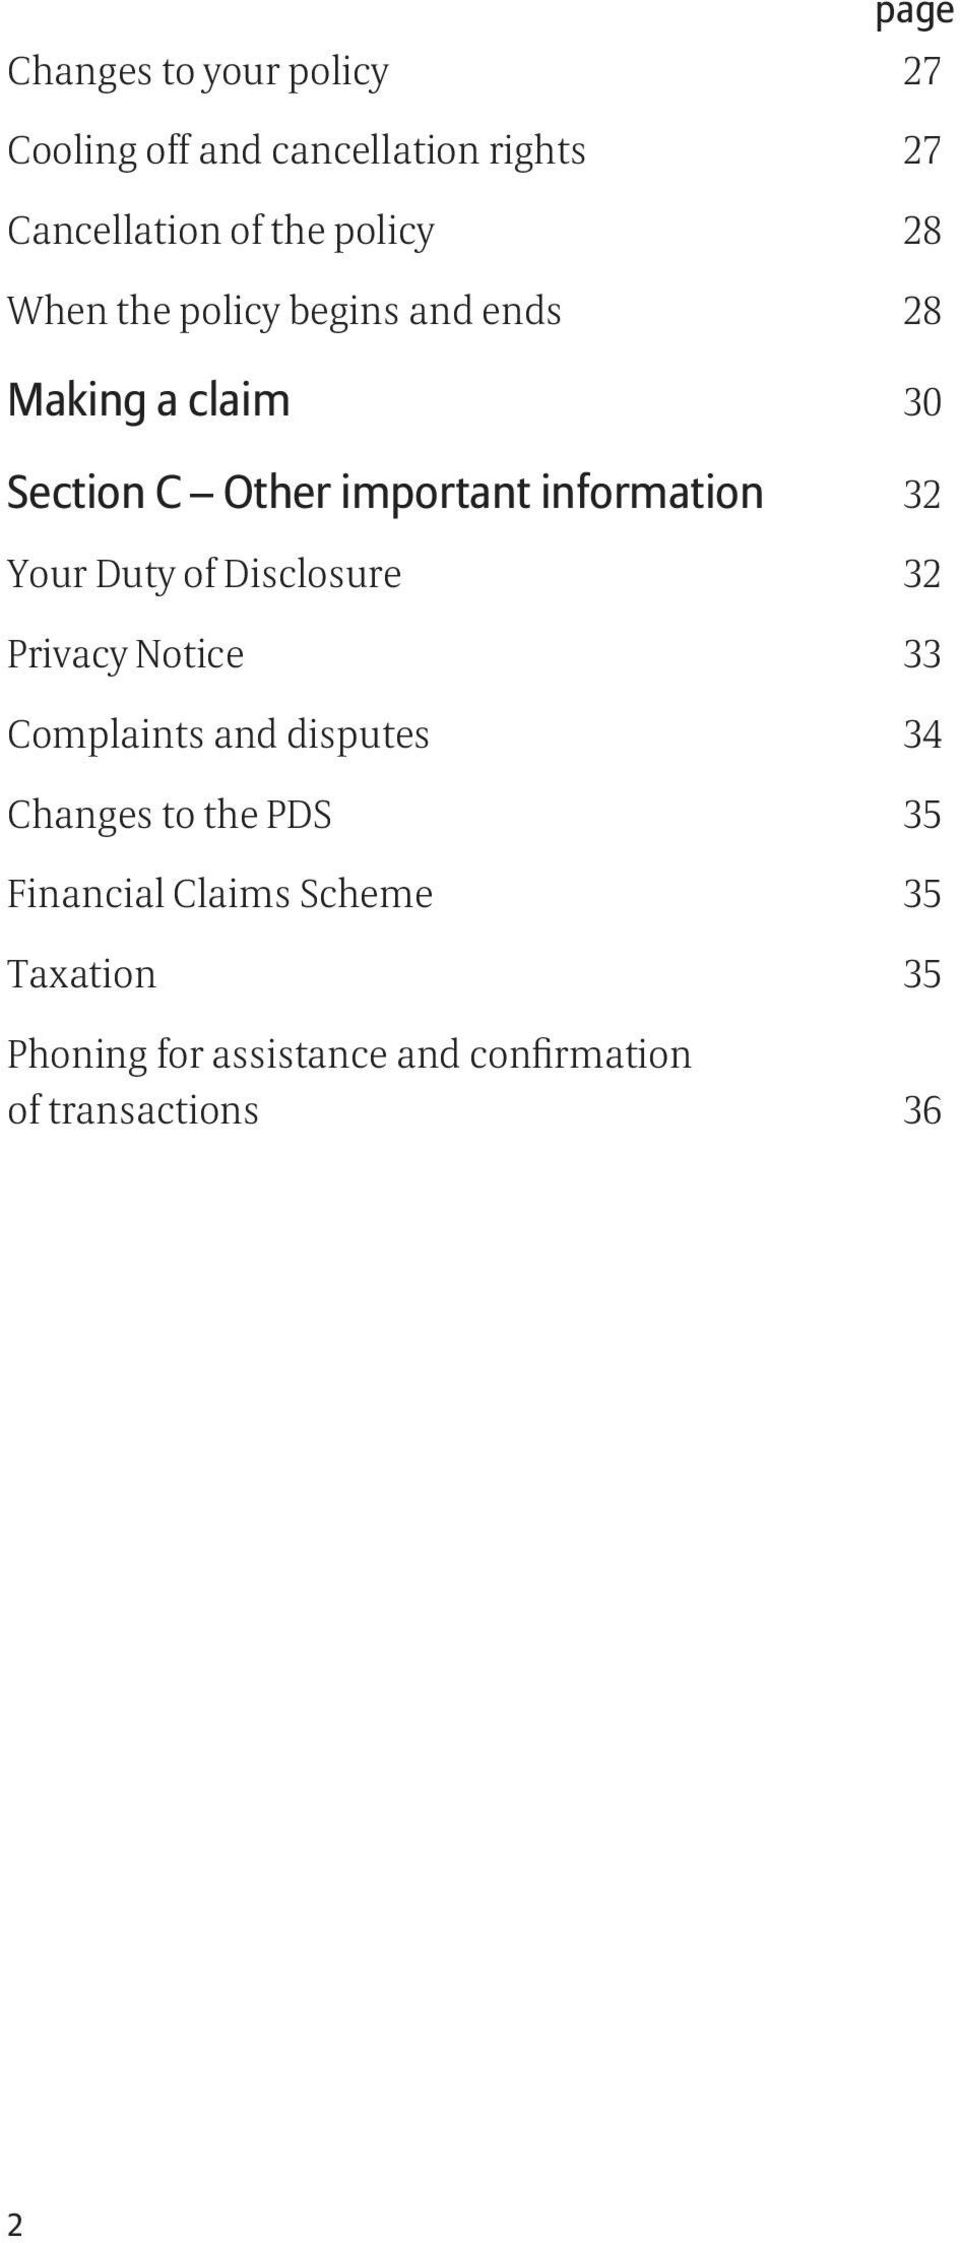 Your Duty of Disclosure 32 Privacy Notice 33 Complaints and disputes 34 Changes to the PDS 35